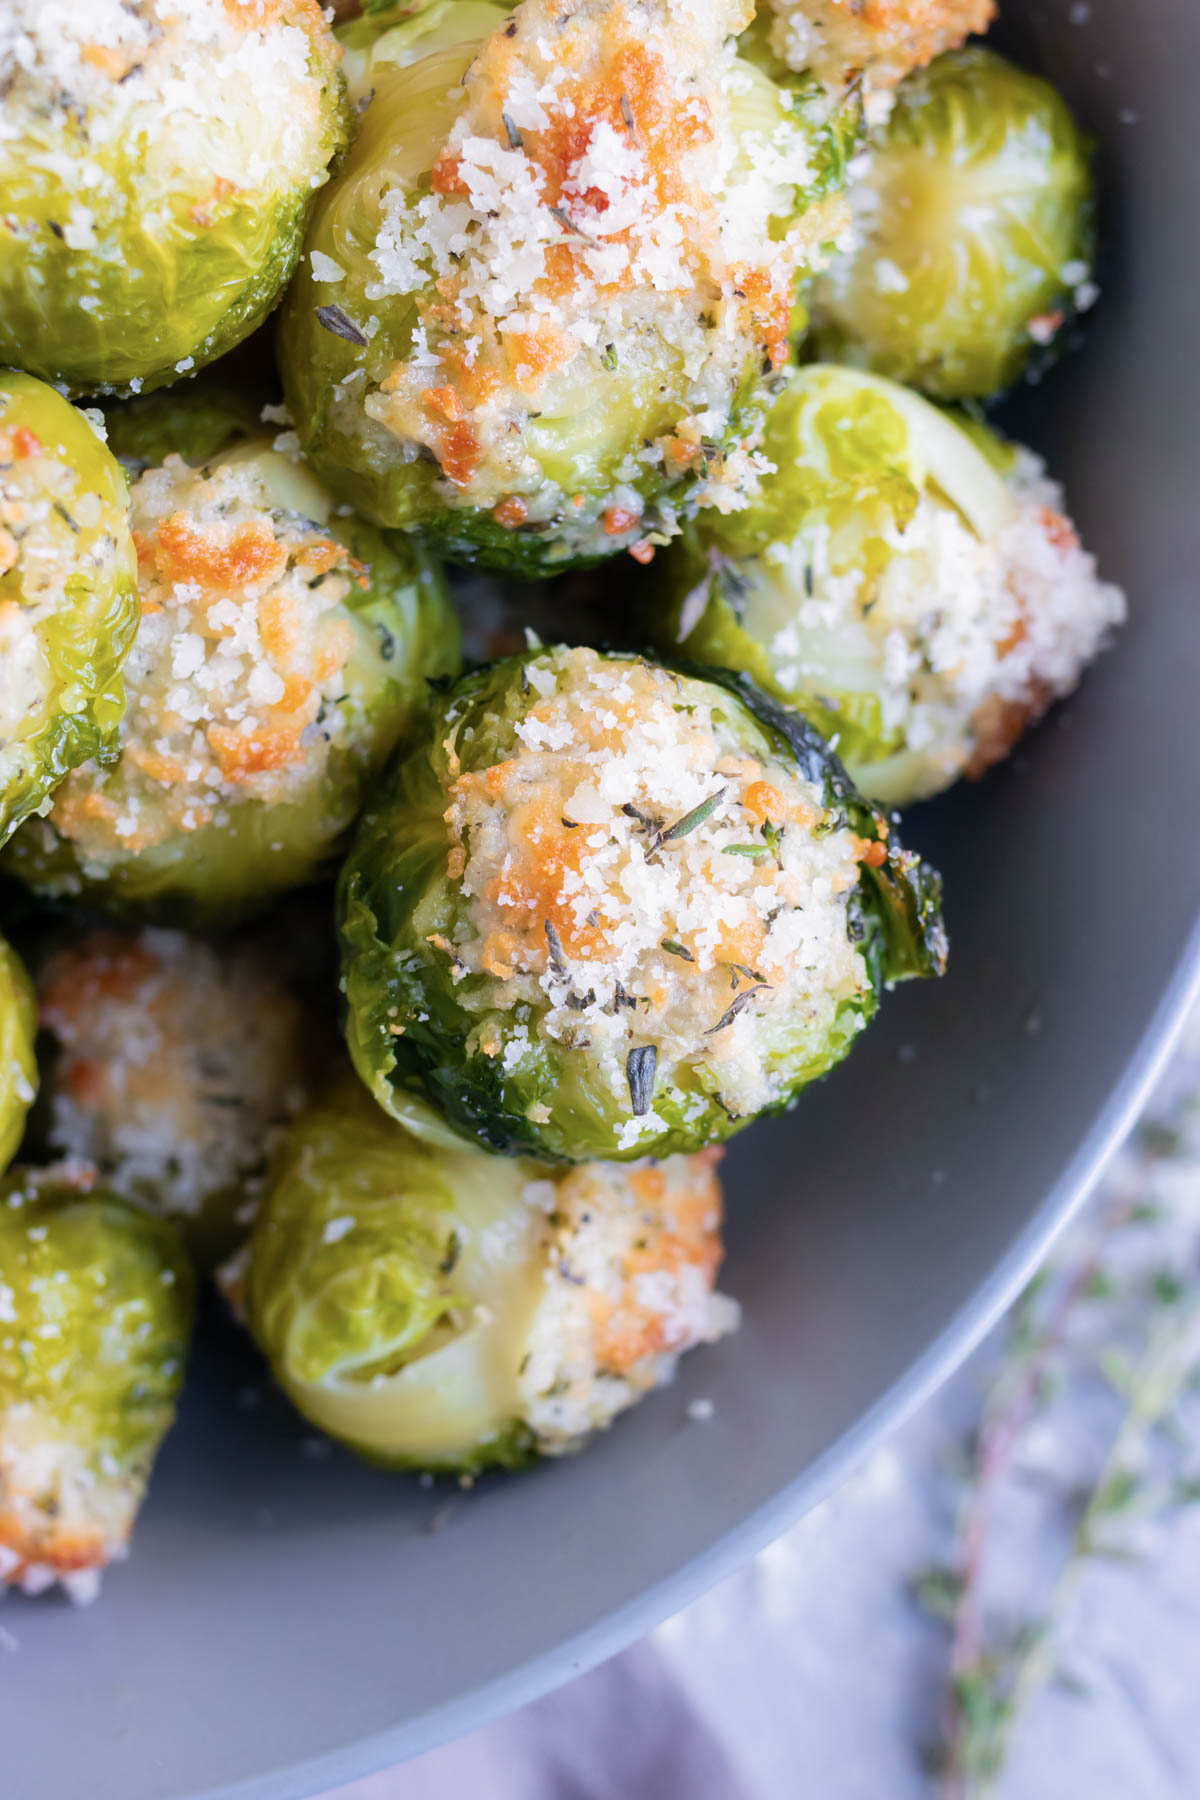 Roasted Brussels sprouts that are topped with Parmesan cheese and served as a healthy Thanksgiving, Christmas, or Easter side dish recipe.